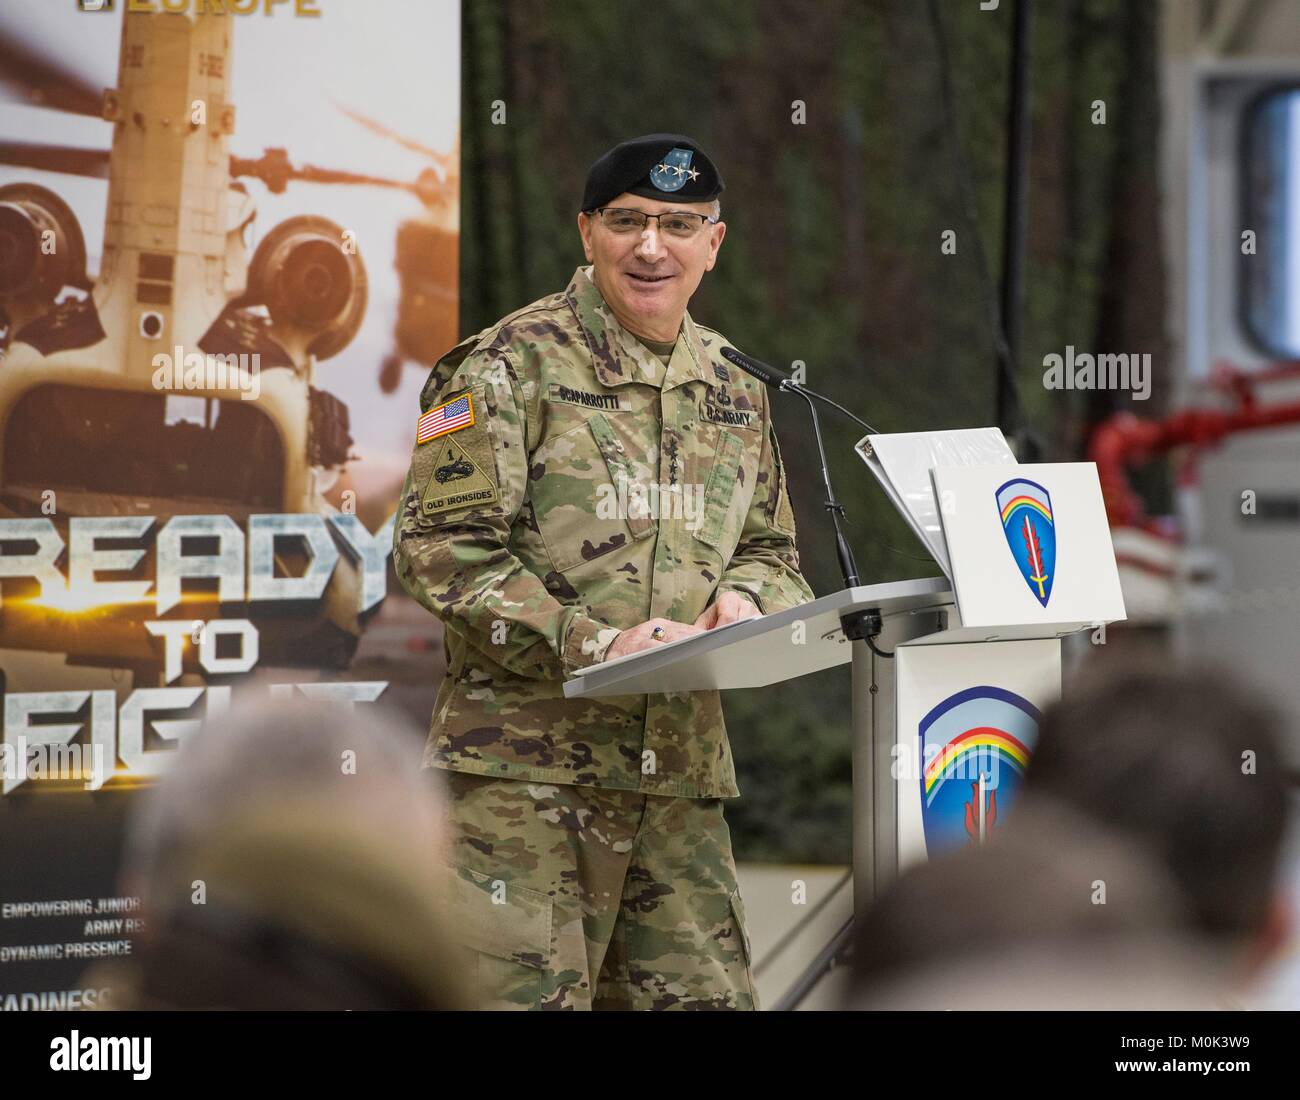 U.S. European Command (EUCOM) Commander Curtis Scaparotti speaks during the U.S. Army Europe (USAREUR) Assumption of Command Ceremony for incoming USAREUR Commander Christopher Cavioli at Lucius D. Clay Kaserne January 18, 2018 in Wiesbaden-Erbenheim, Germany. Stock Photo